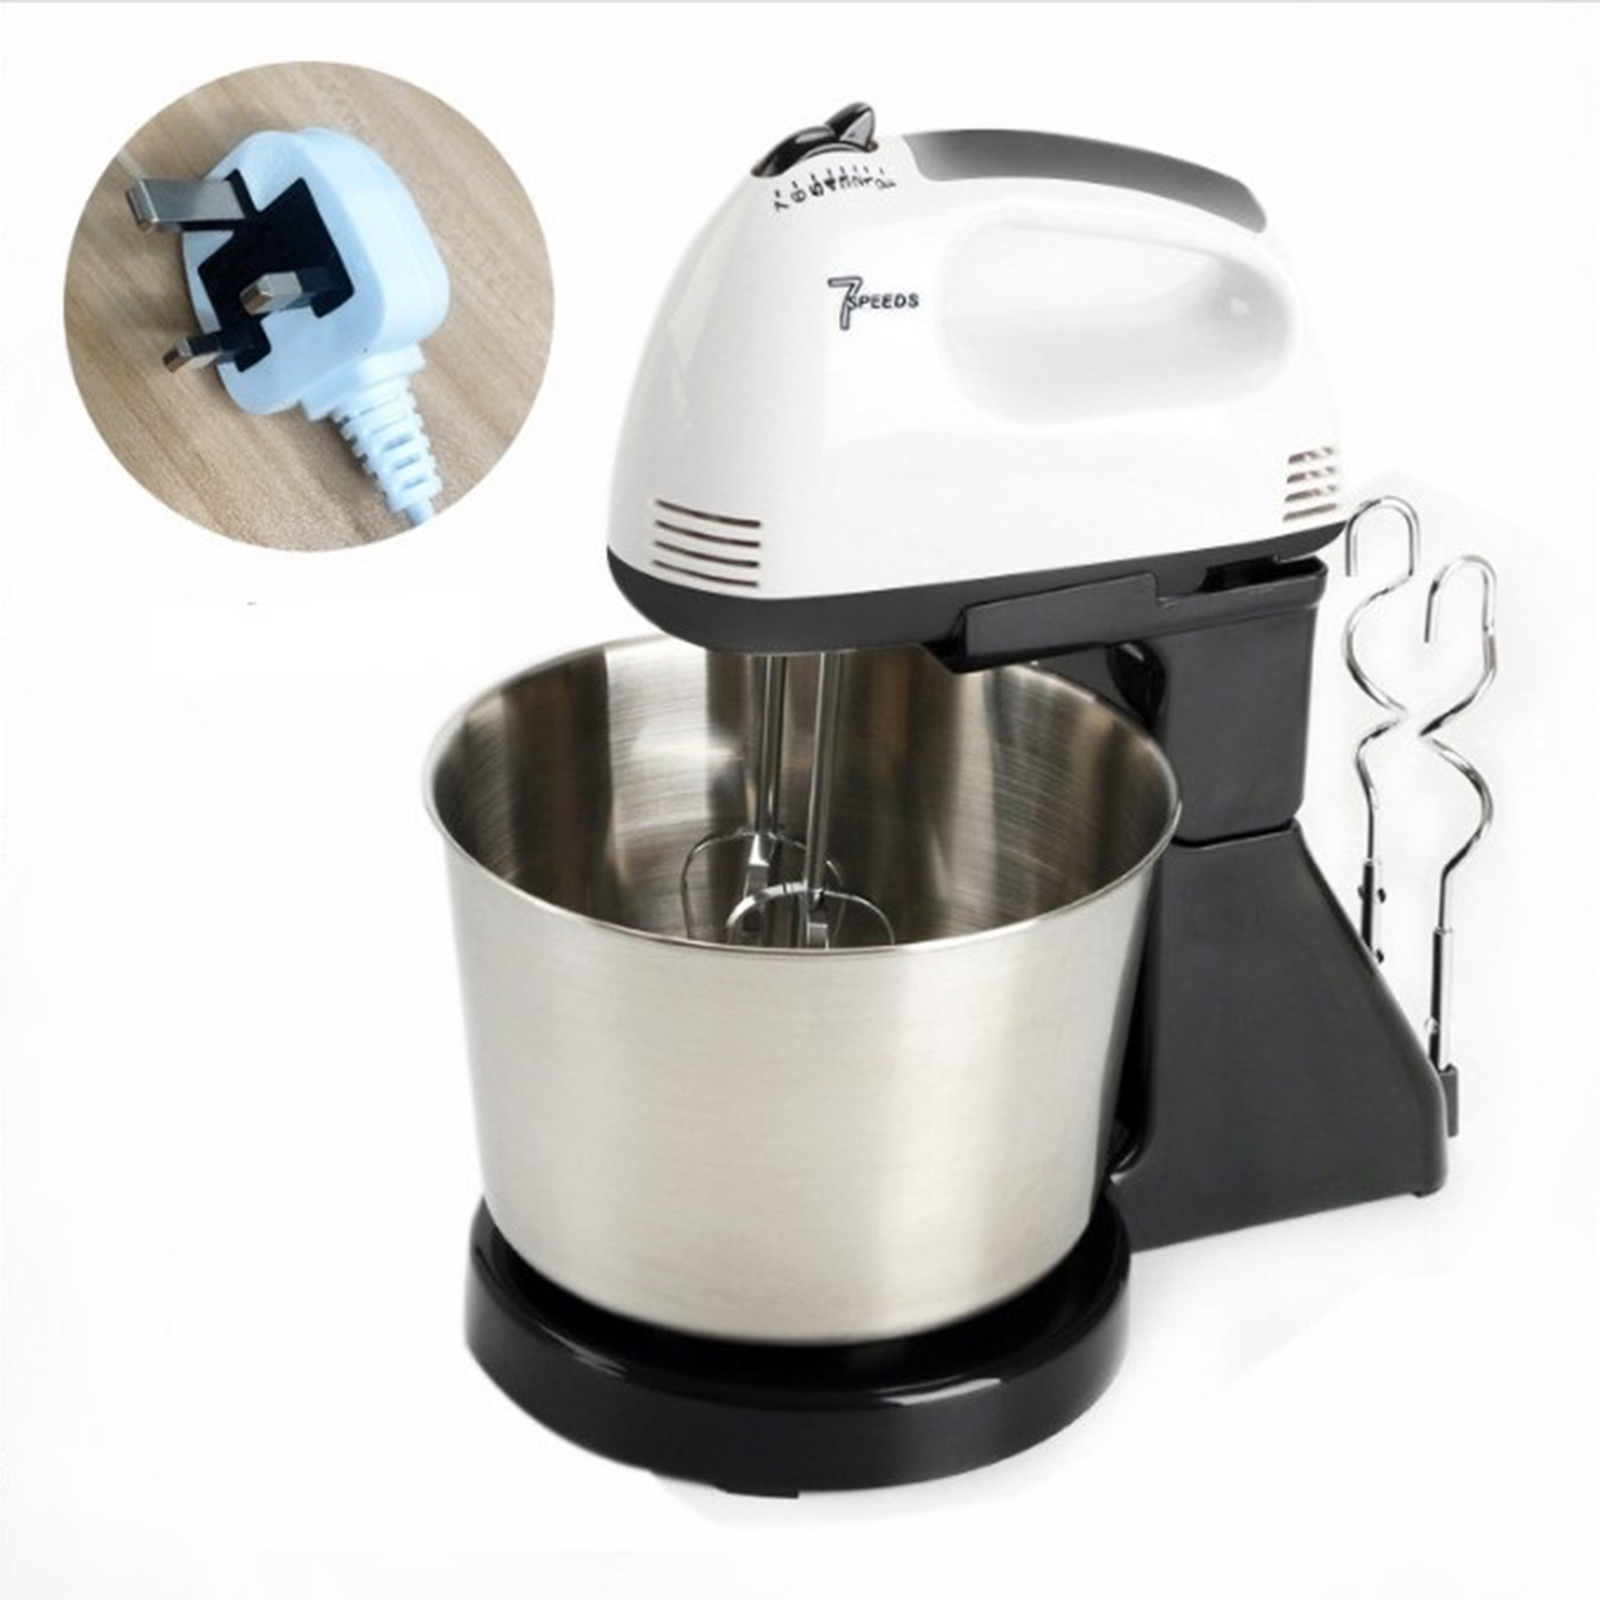 7-speed Automatic Mixer Household Hand-held Electric Food Mixers Kitchen Machine Egg Beater For Baking black/UK plug